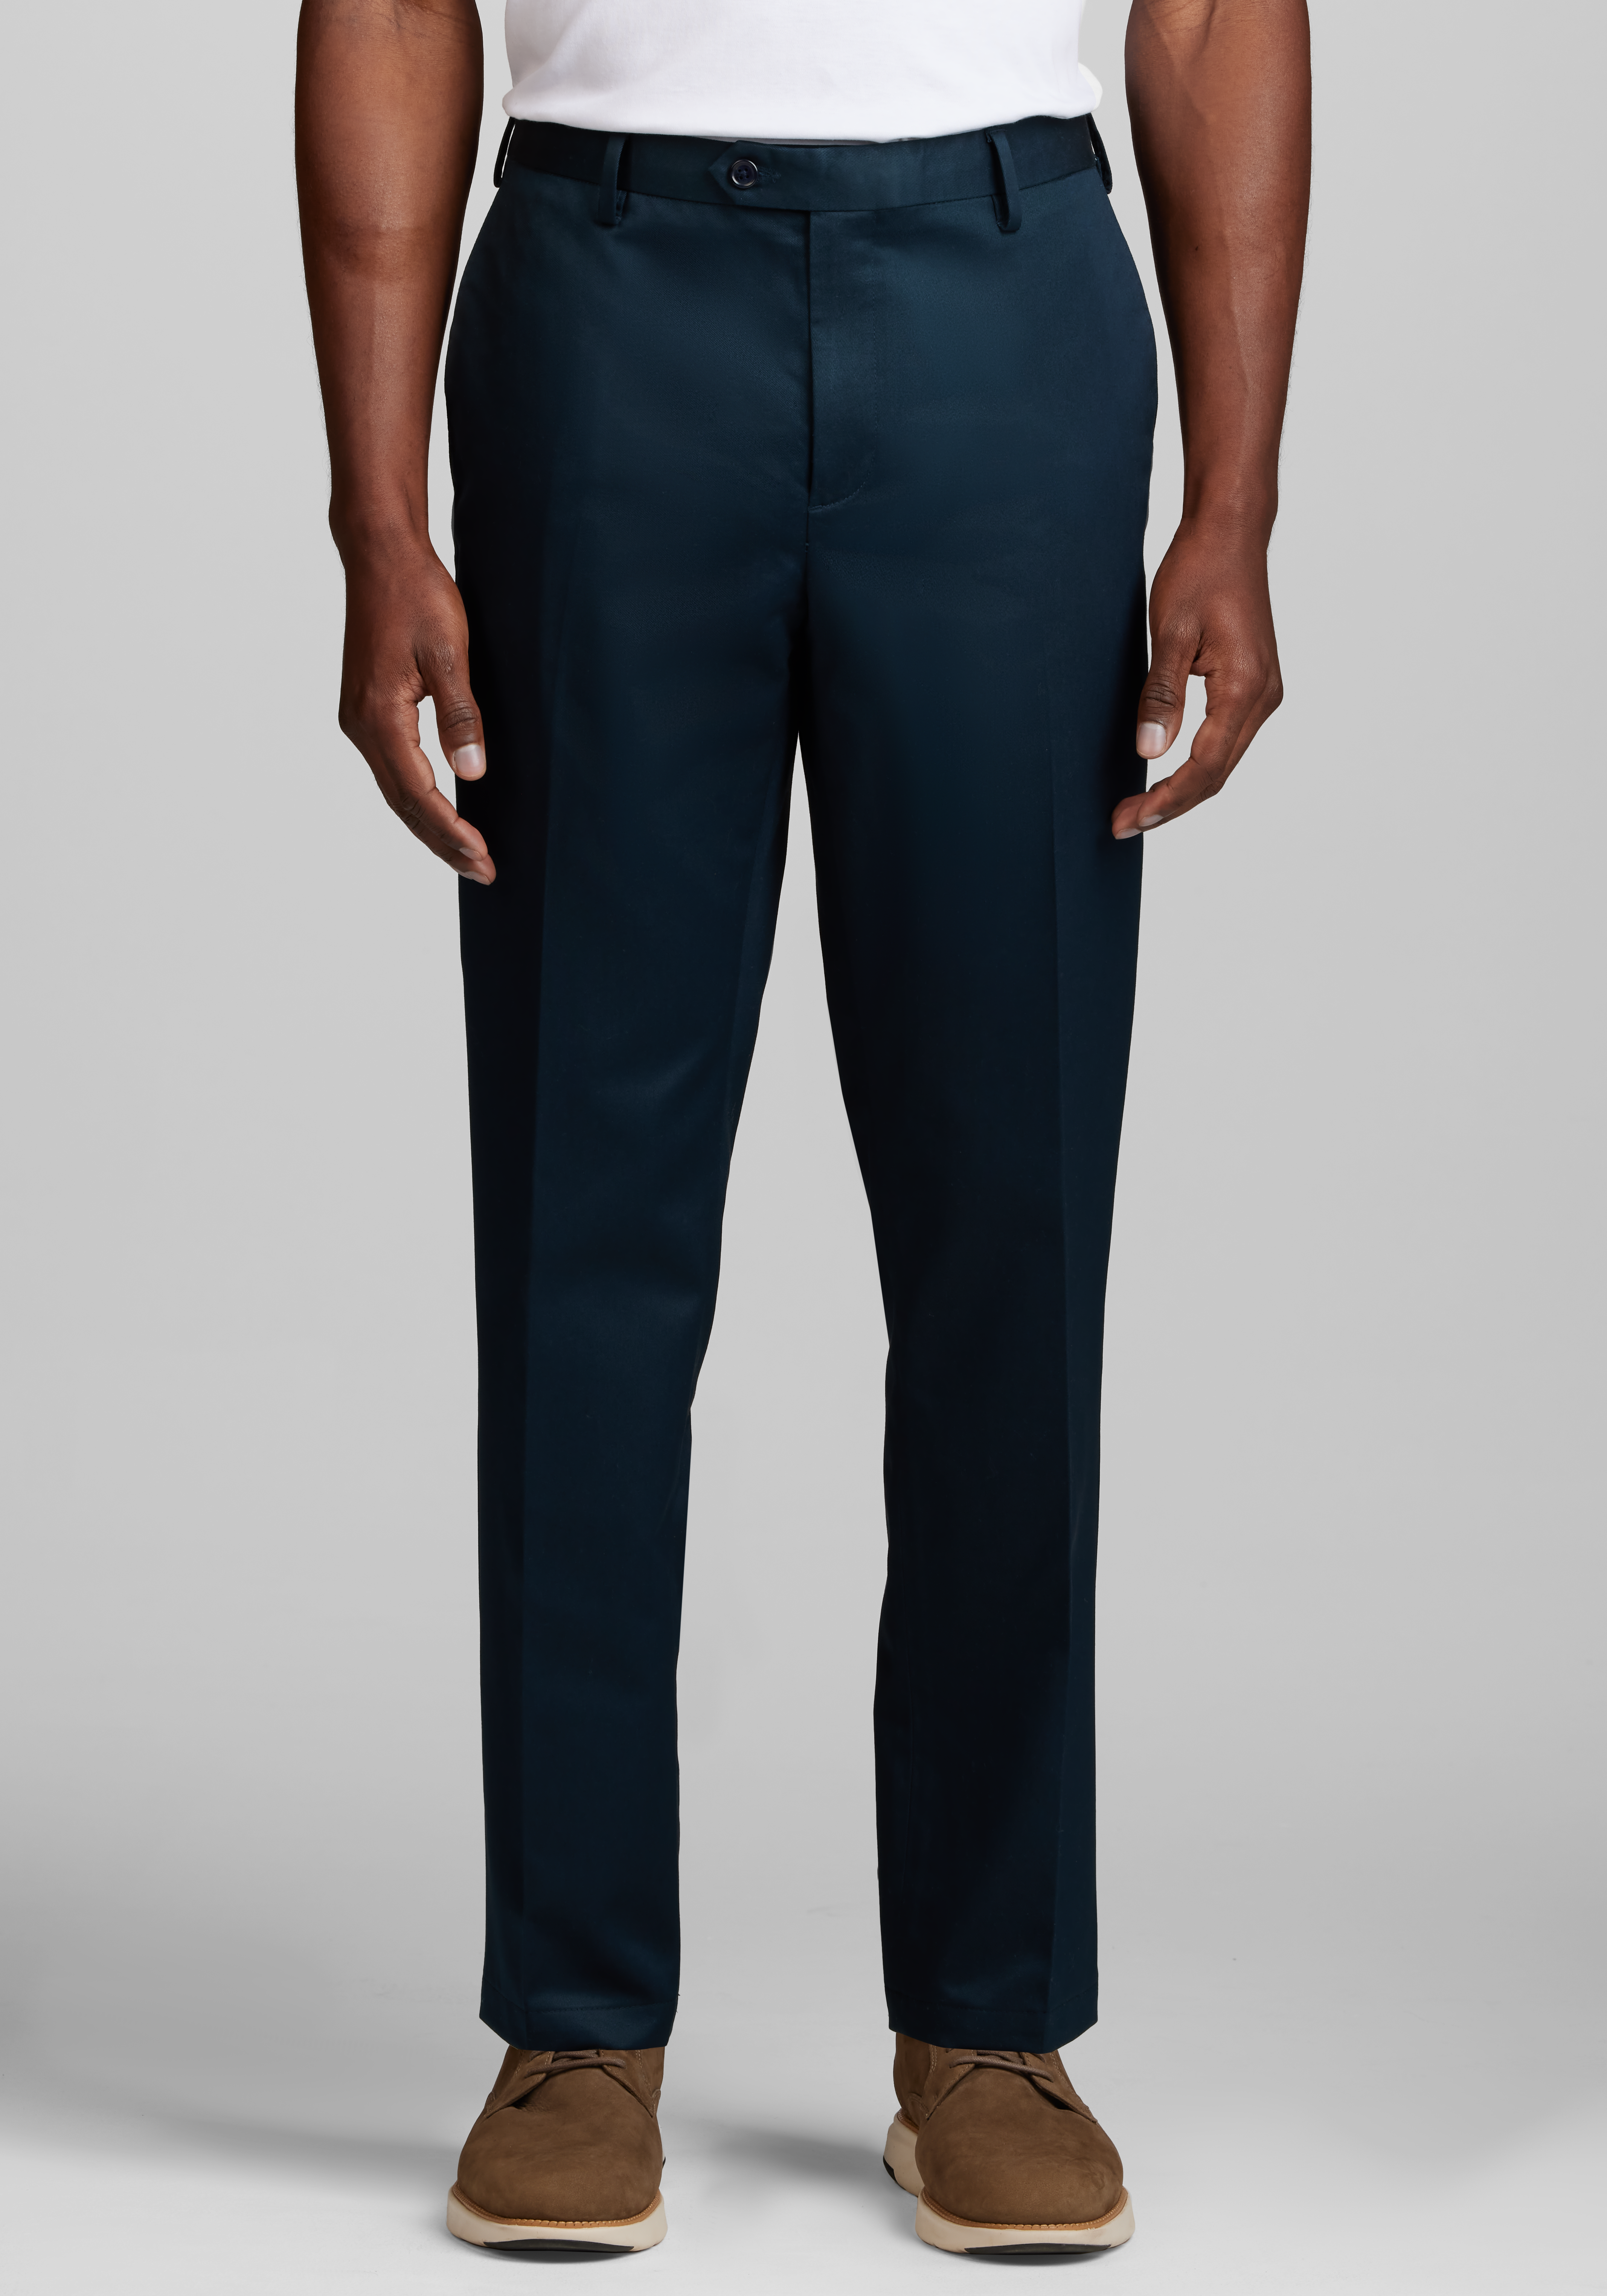 Onvous Everyday Men's Pants for Active, Casual, and Work, Versatile &  Comfortable